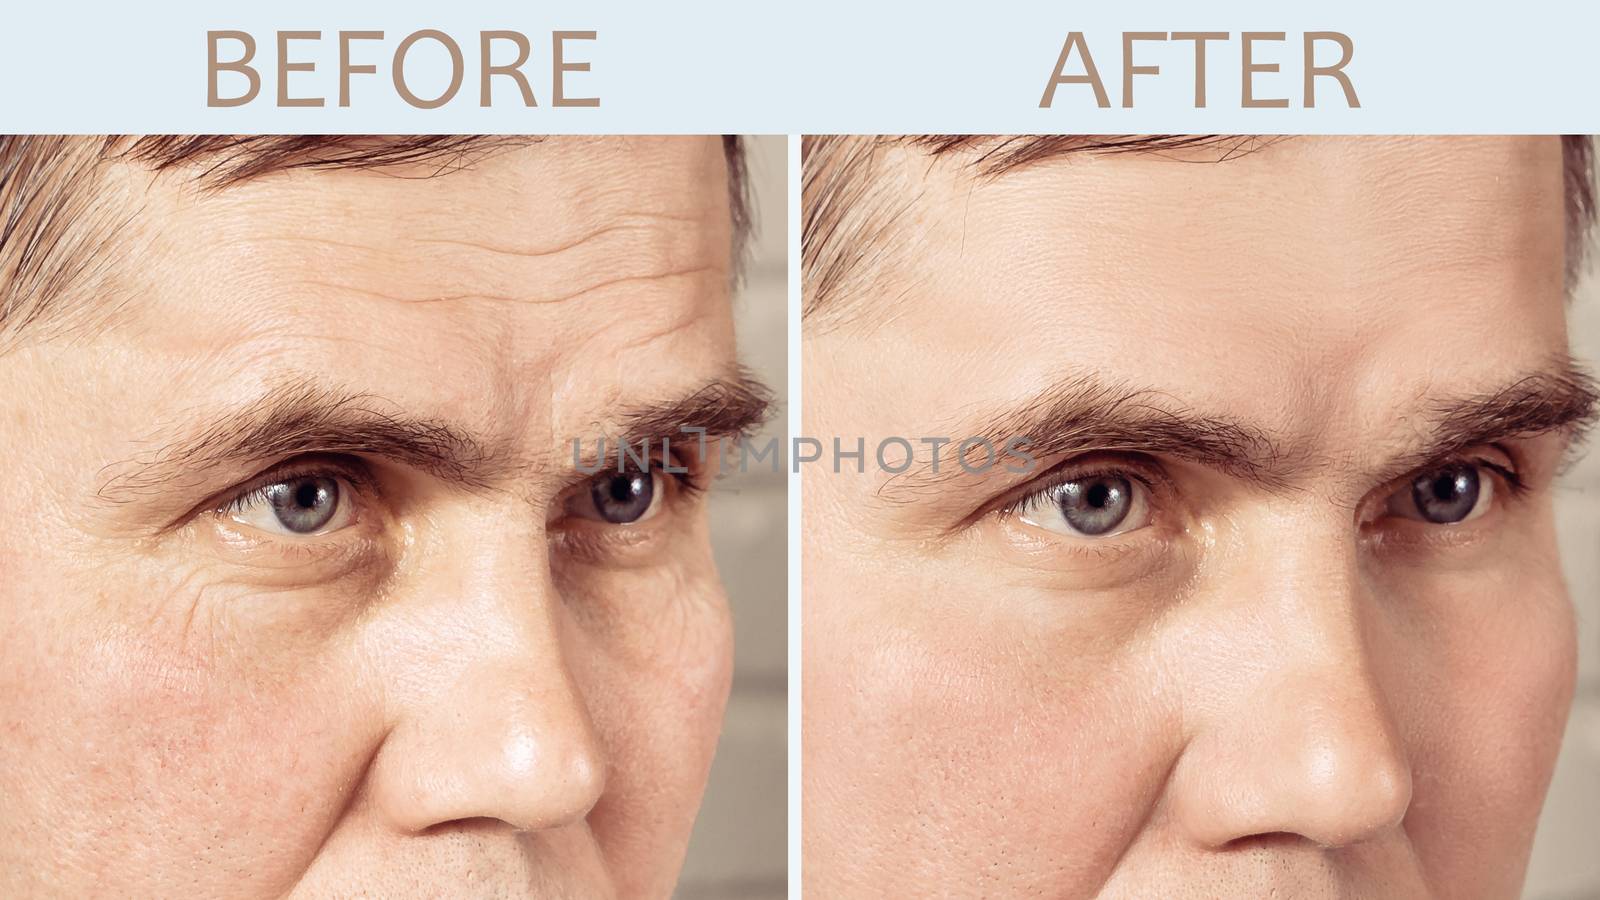 Face of a mature man before and after cosmetic rejuvenating procedures by galsand